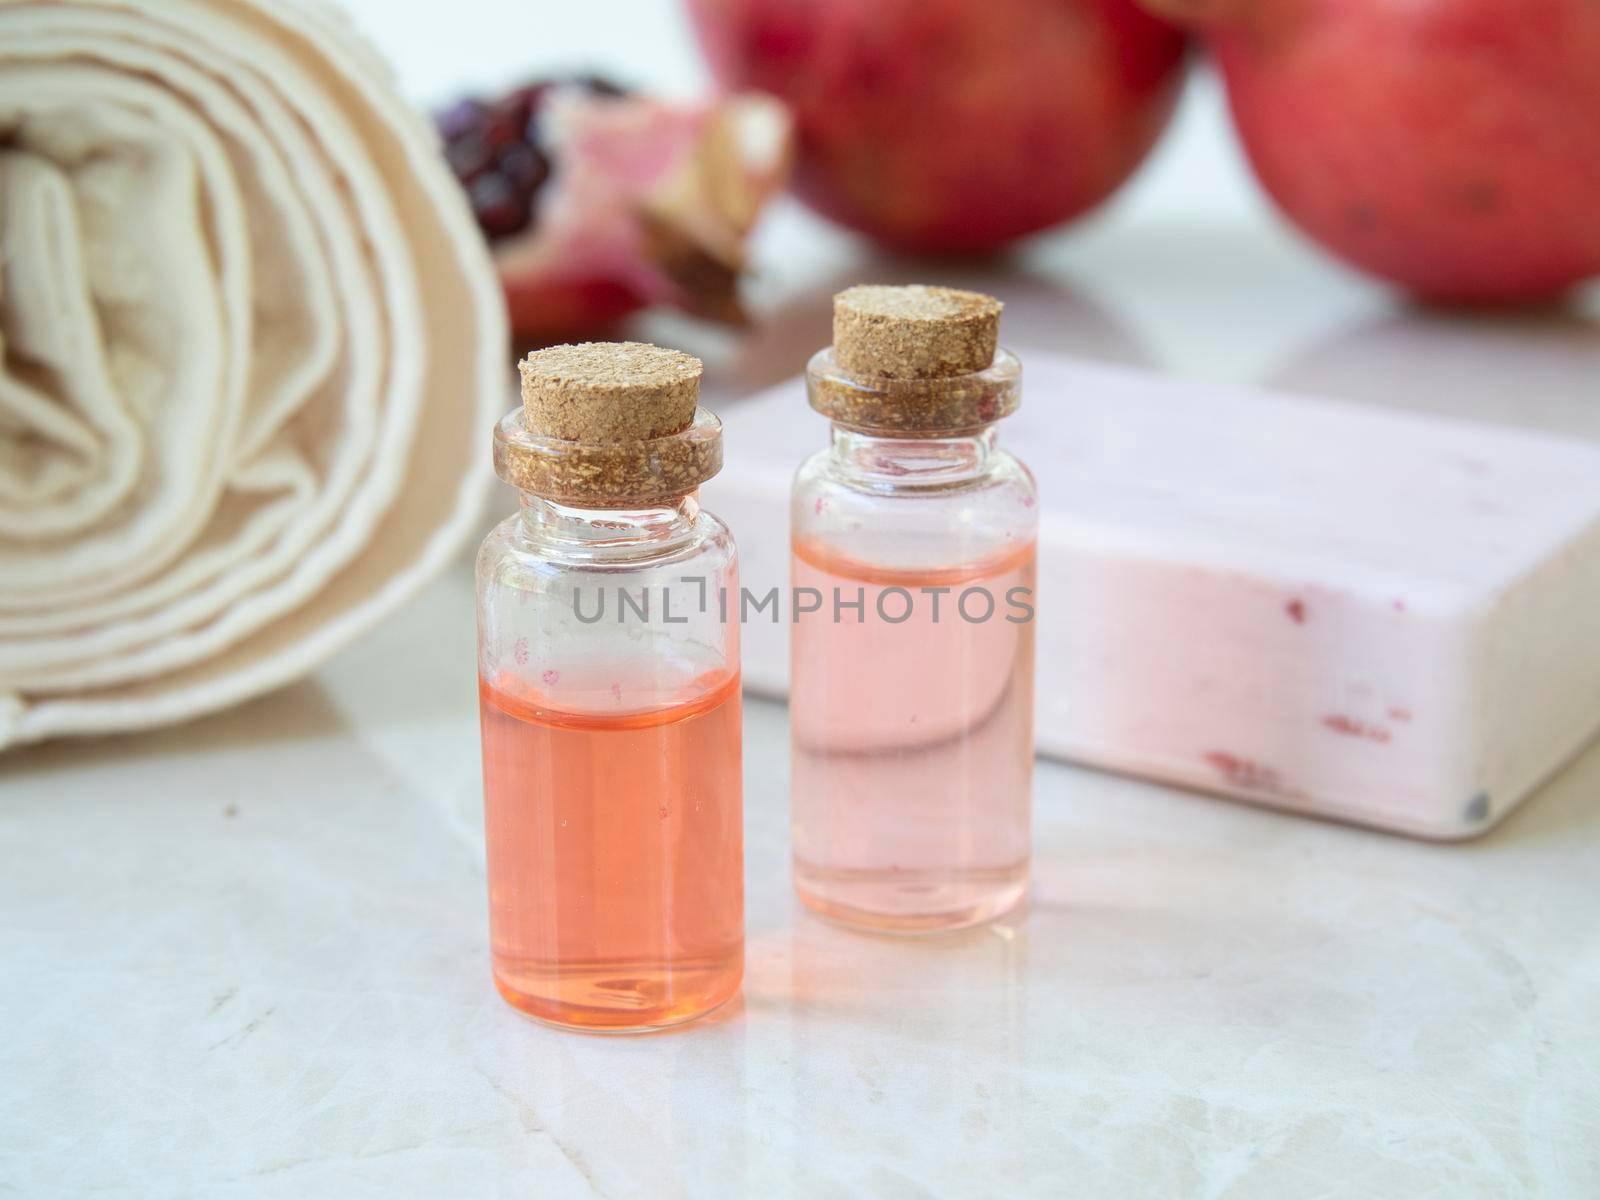 Two bottles of fruit extract and fruit soap.